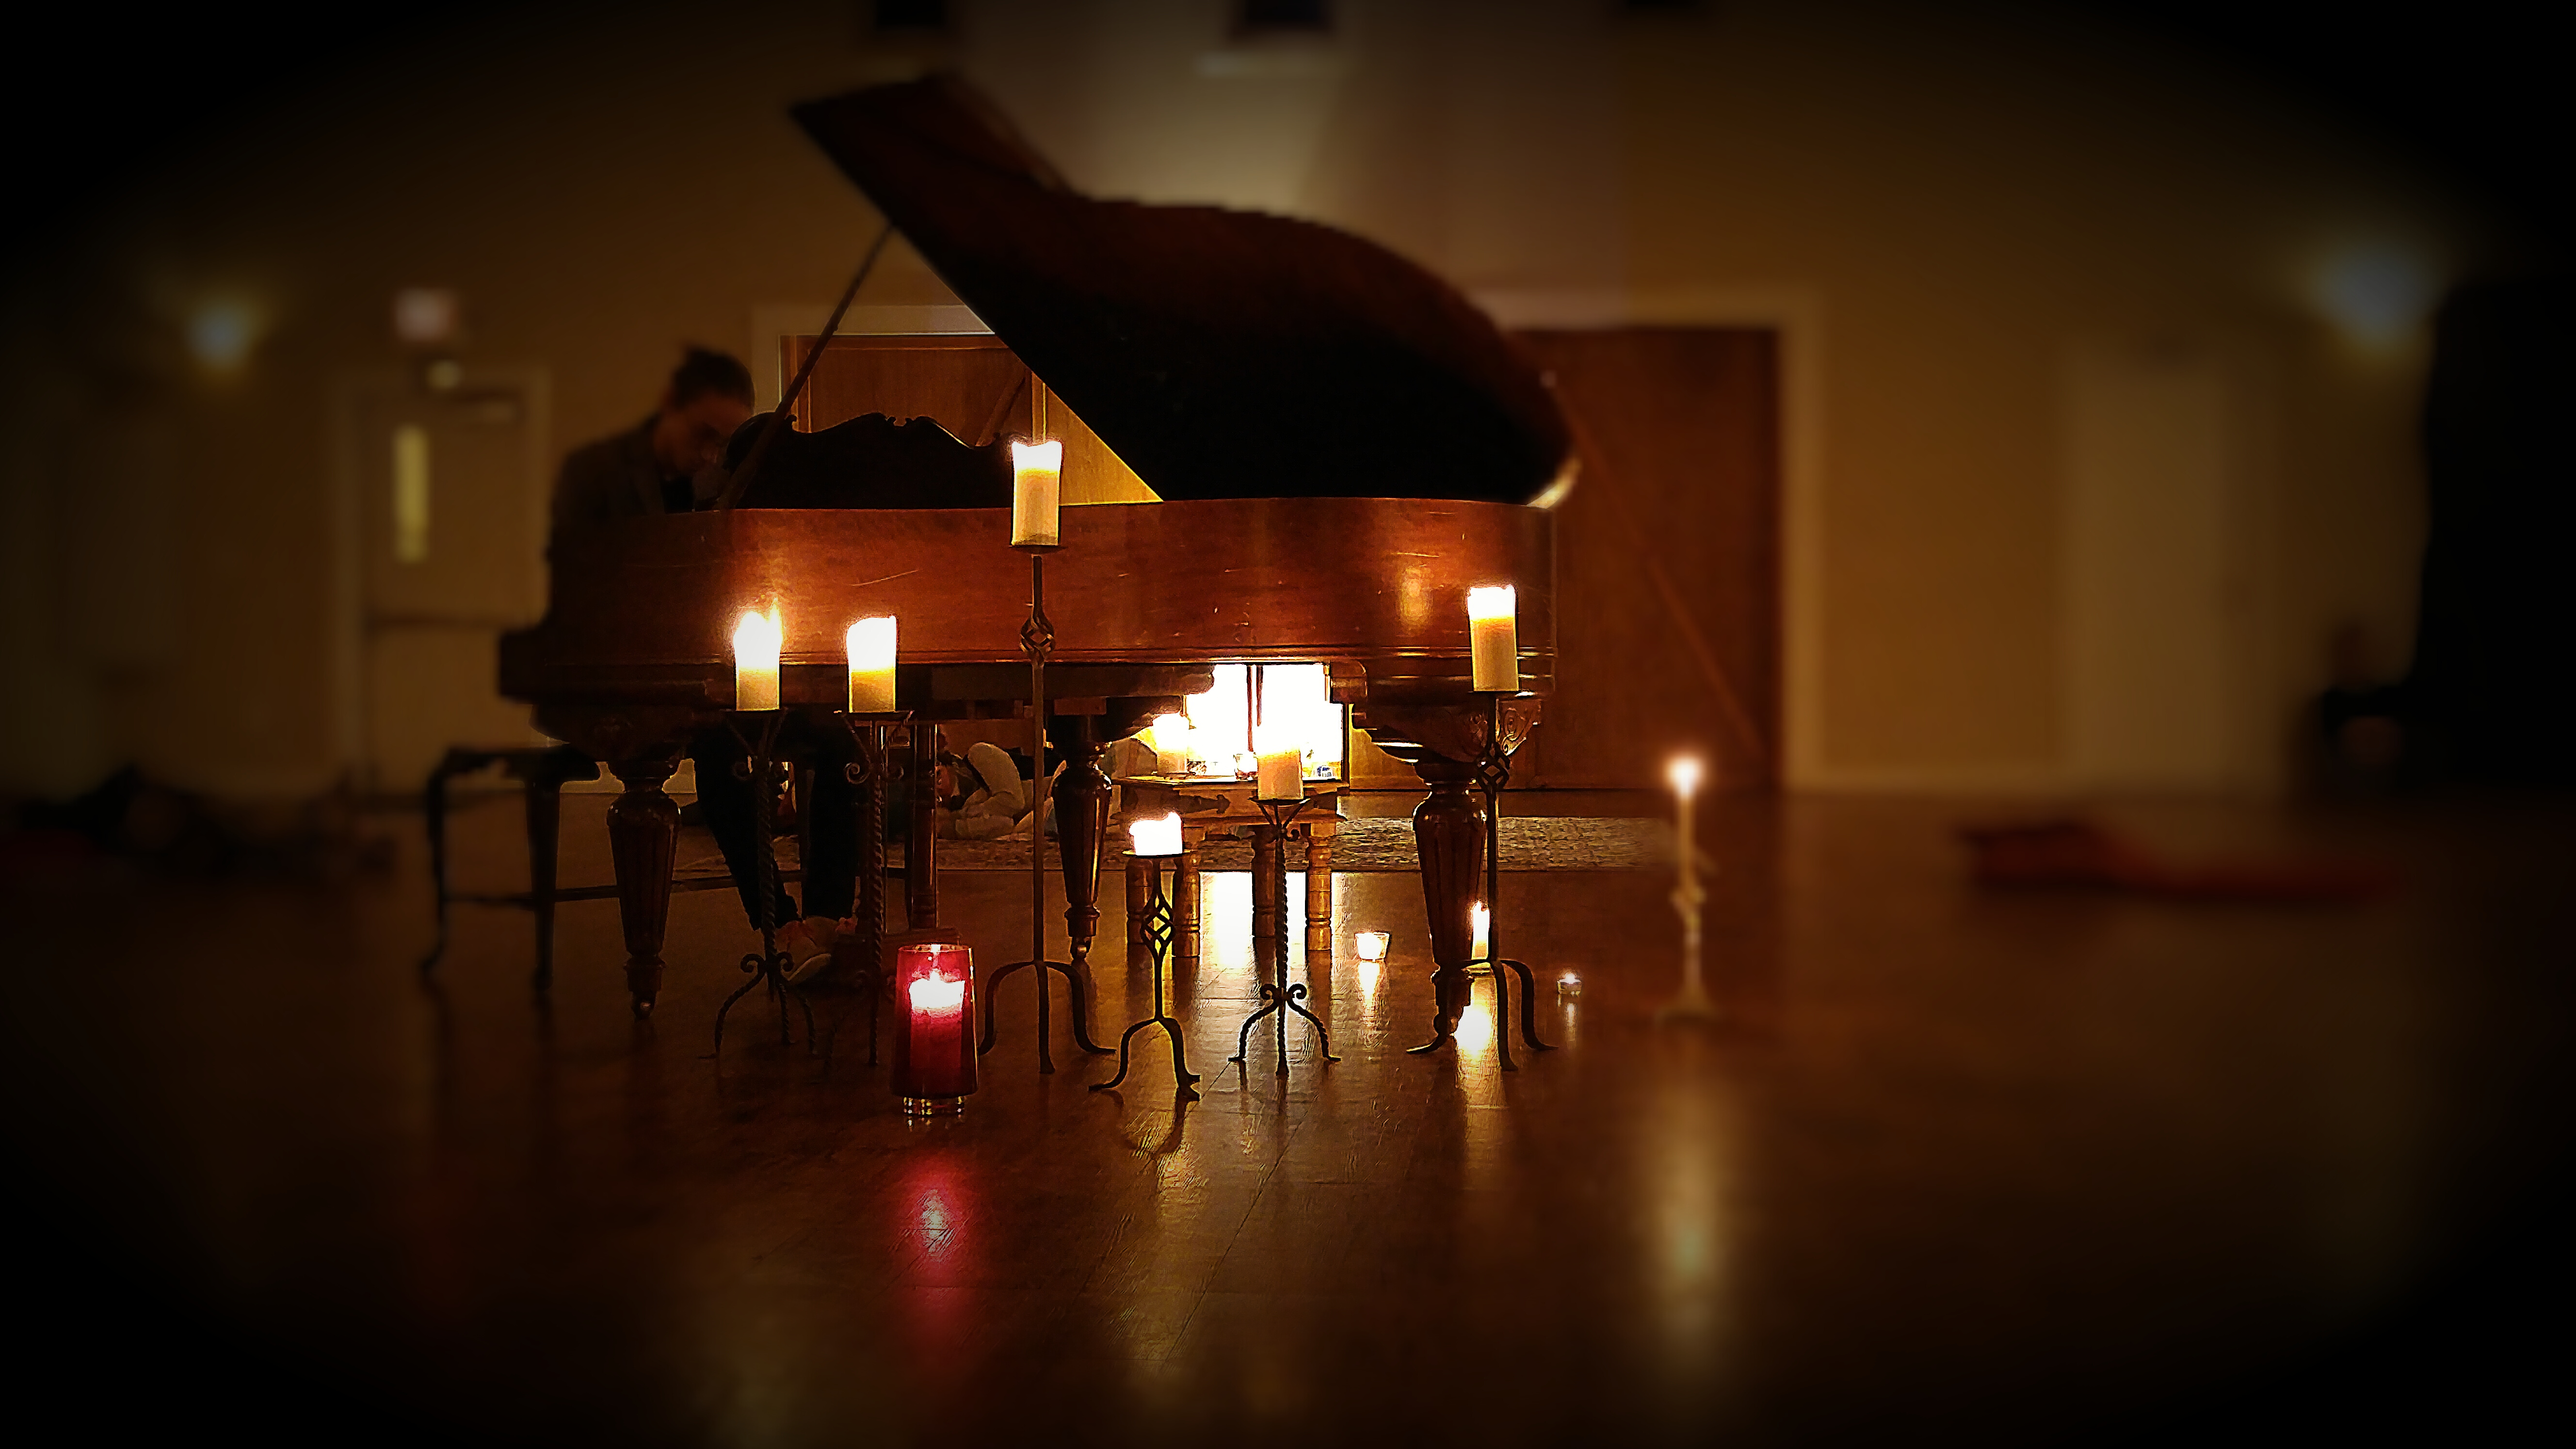 openspace piano candles IMG_20151108_202756